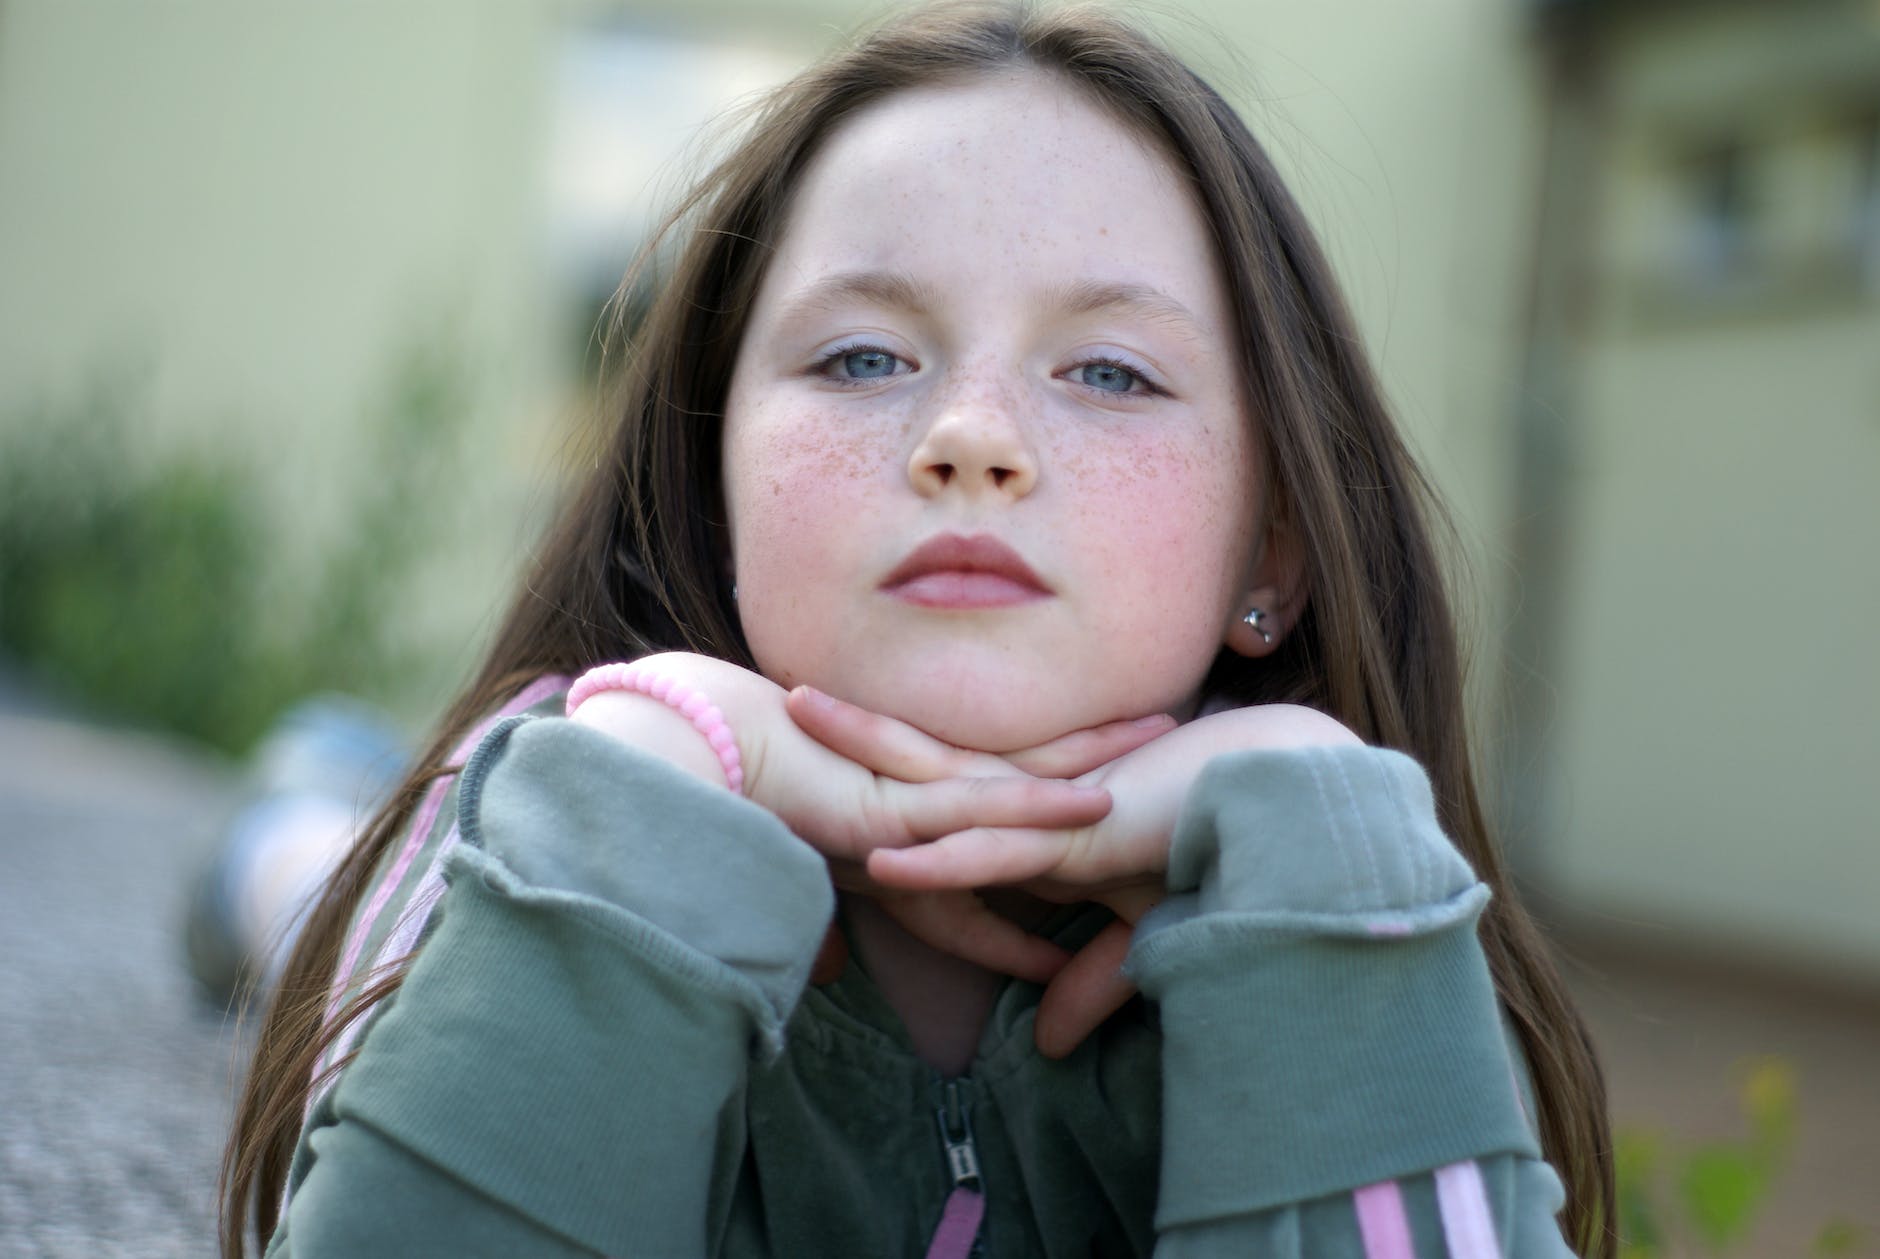 a young girl with freckles sitting on the ground